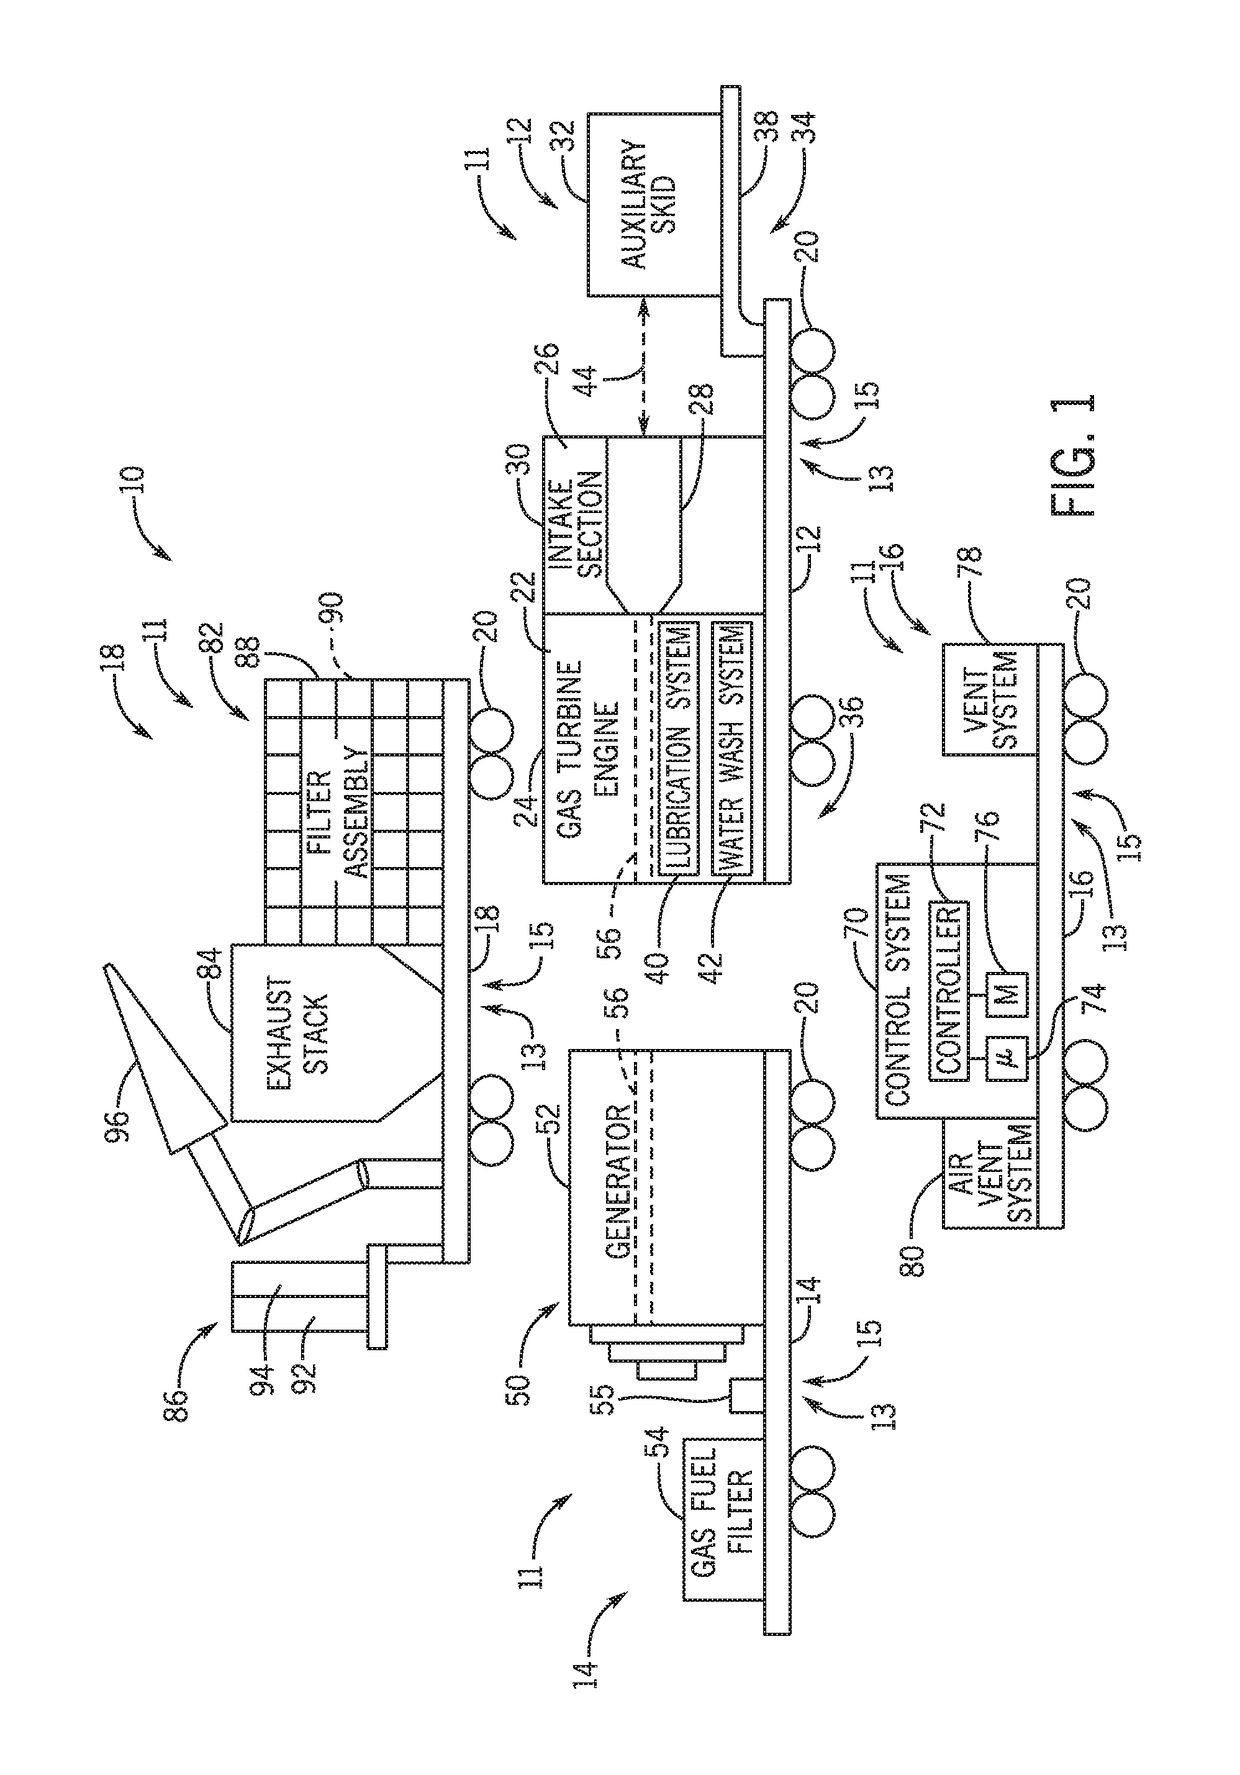 Systems and methods for a mobile power plant with improved mobility and reduced trailer count